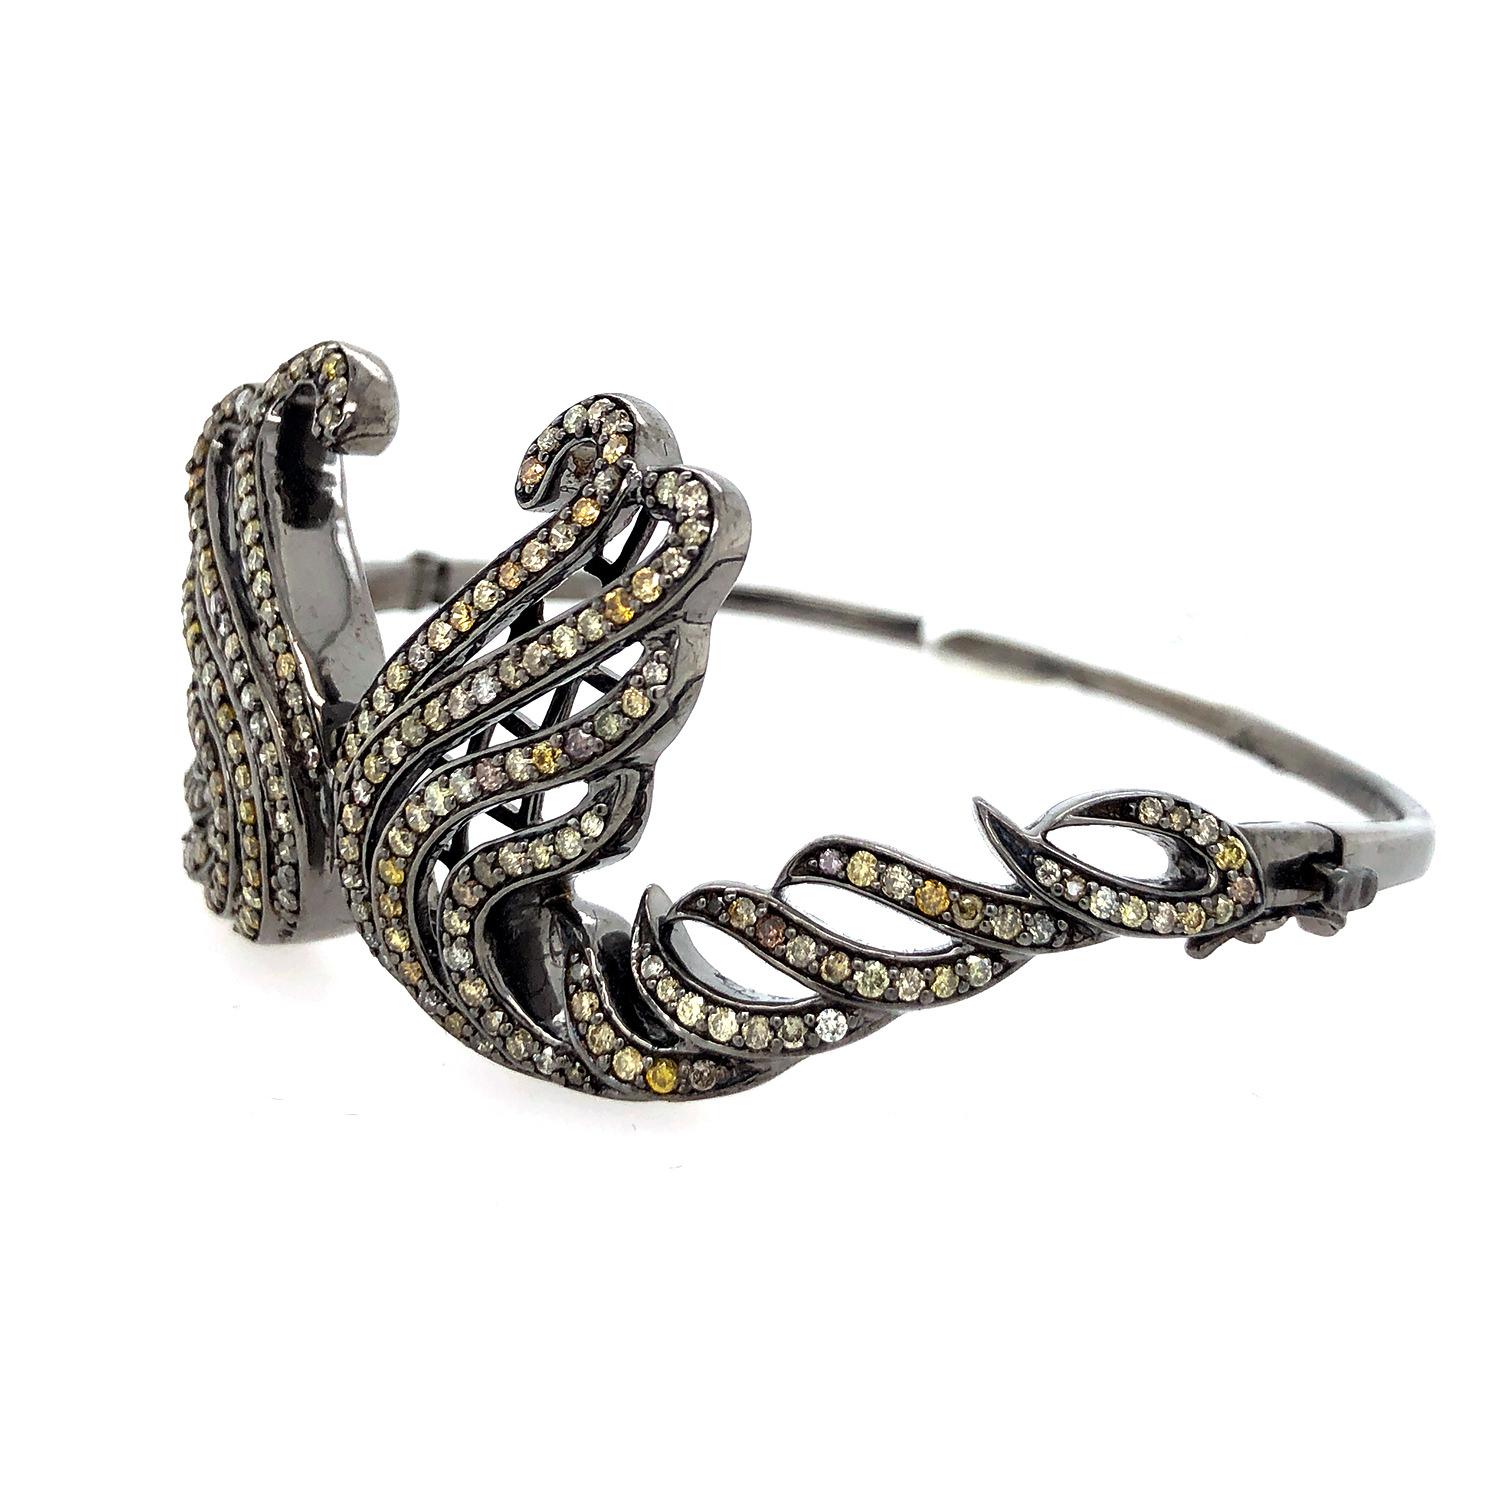 Contemporary Feather Shaped Palm Bracelet With Pave Diamonds Made In 18k Gold & Silver For Sale